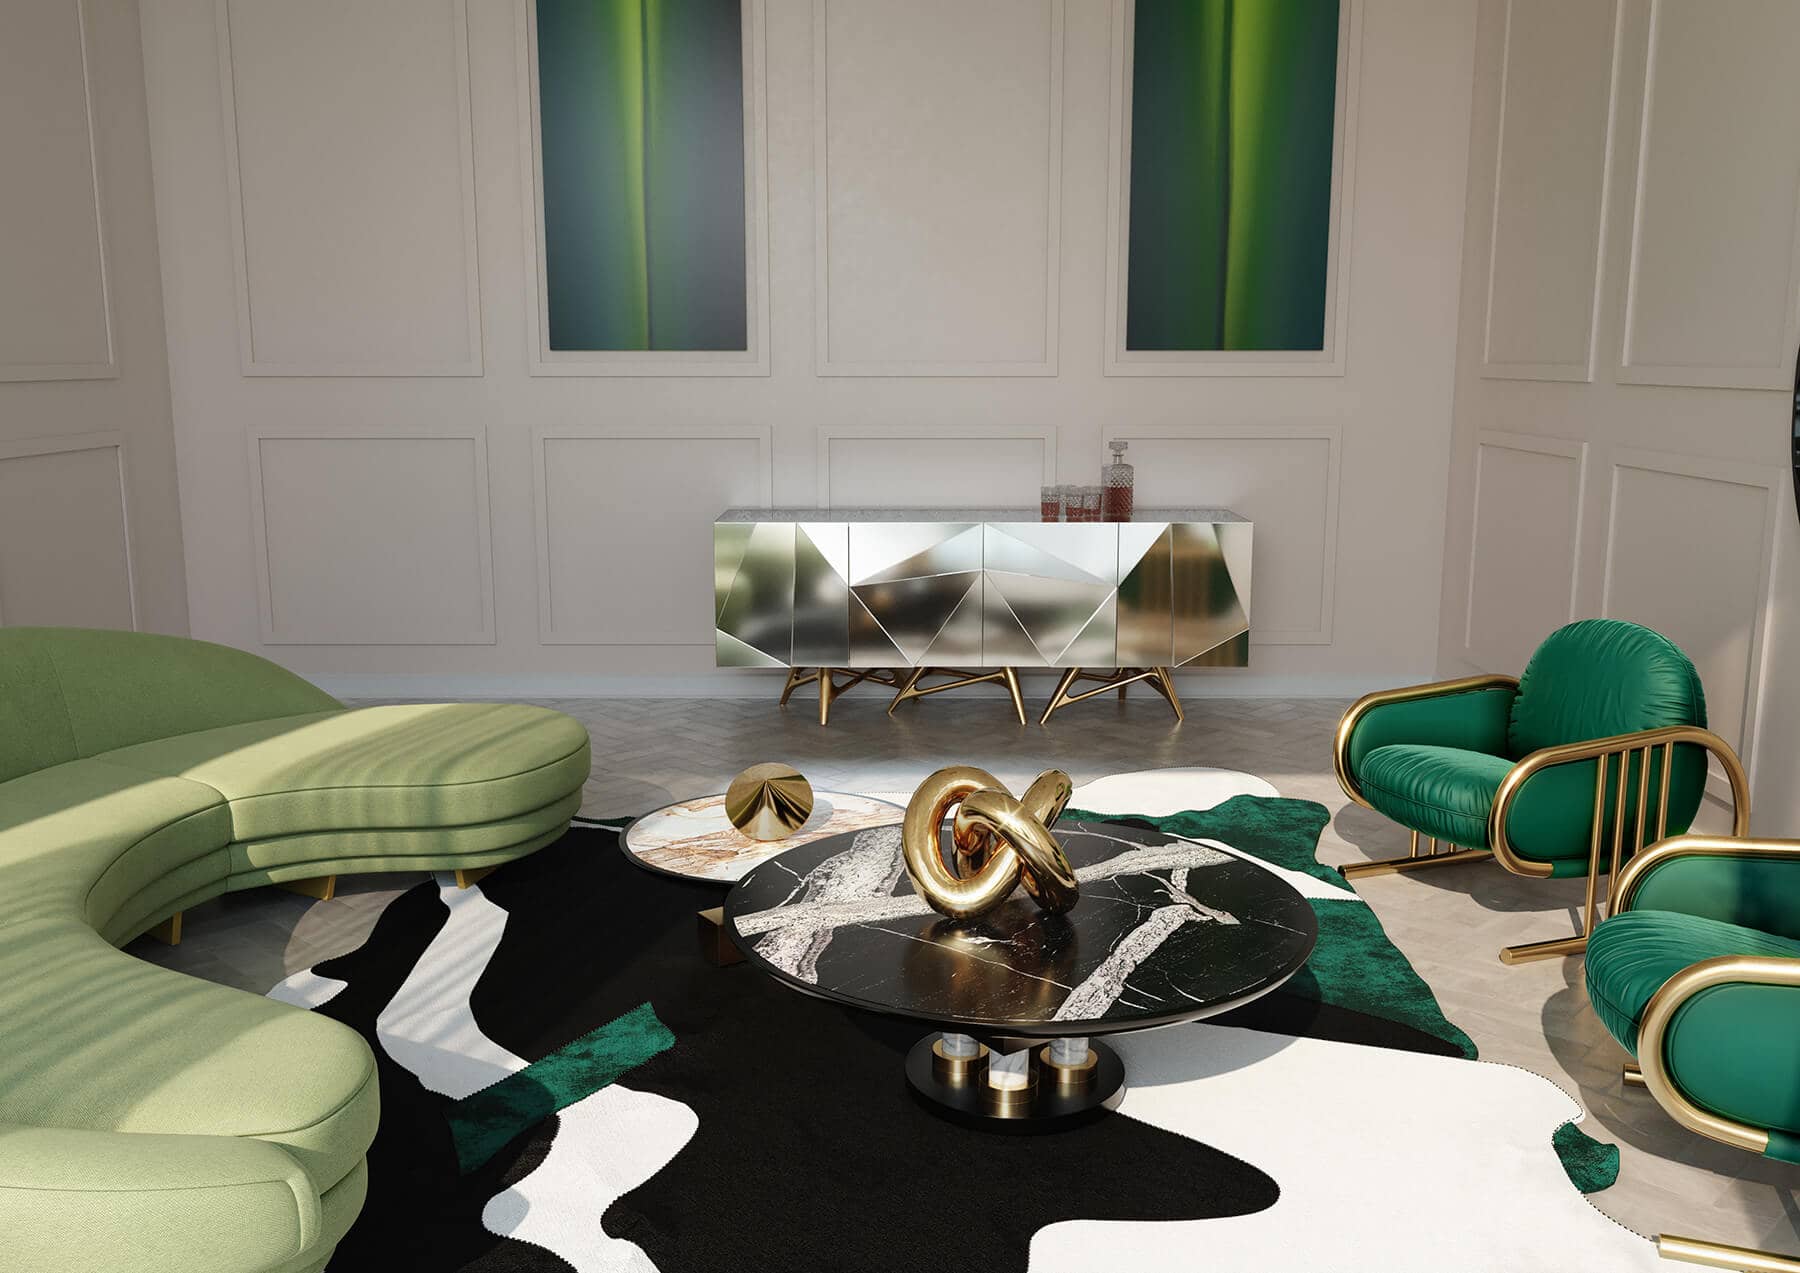 Royal Green Living Room is a remarkable contemporary interior design, luxurious and mysterious, unexpected, but confident.